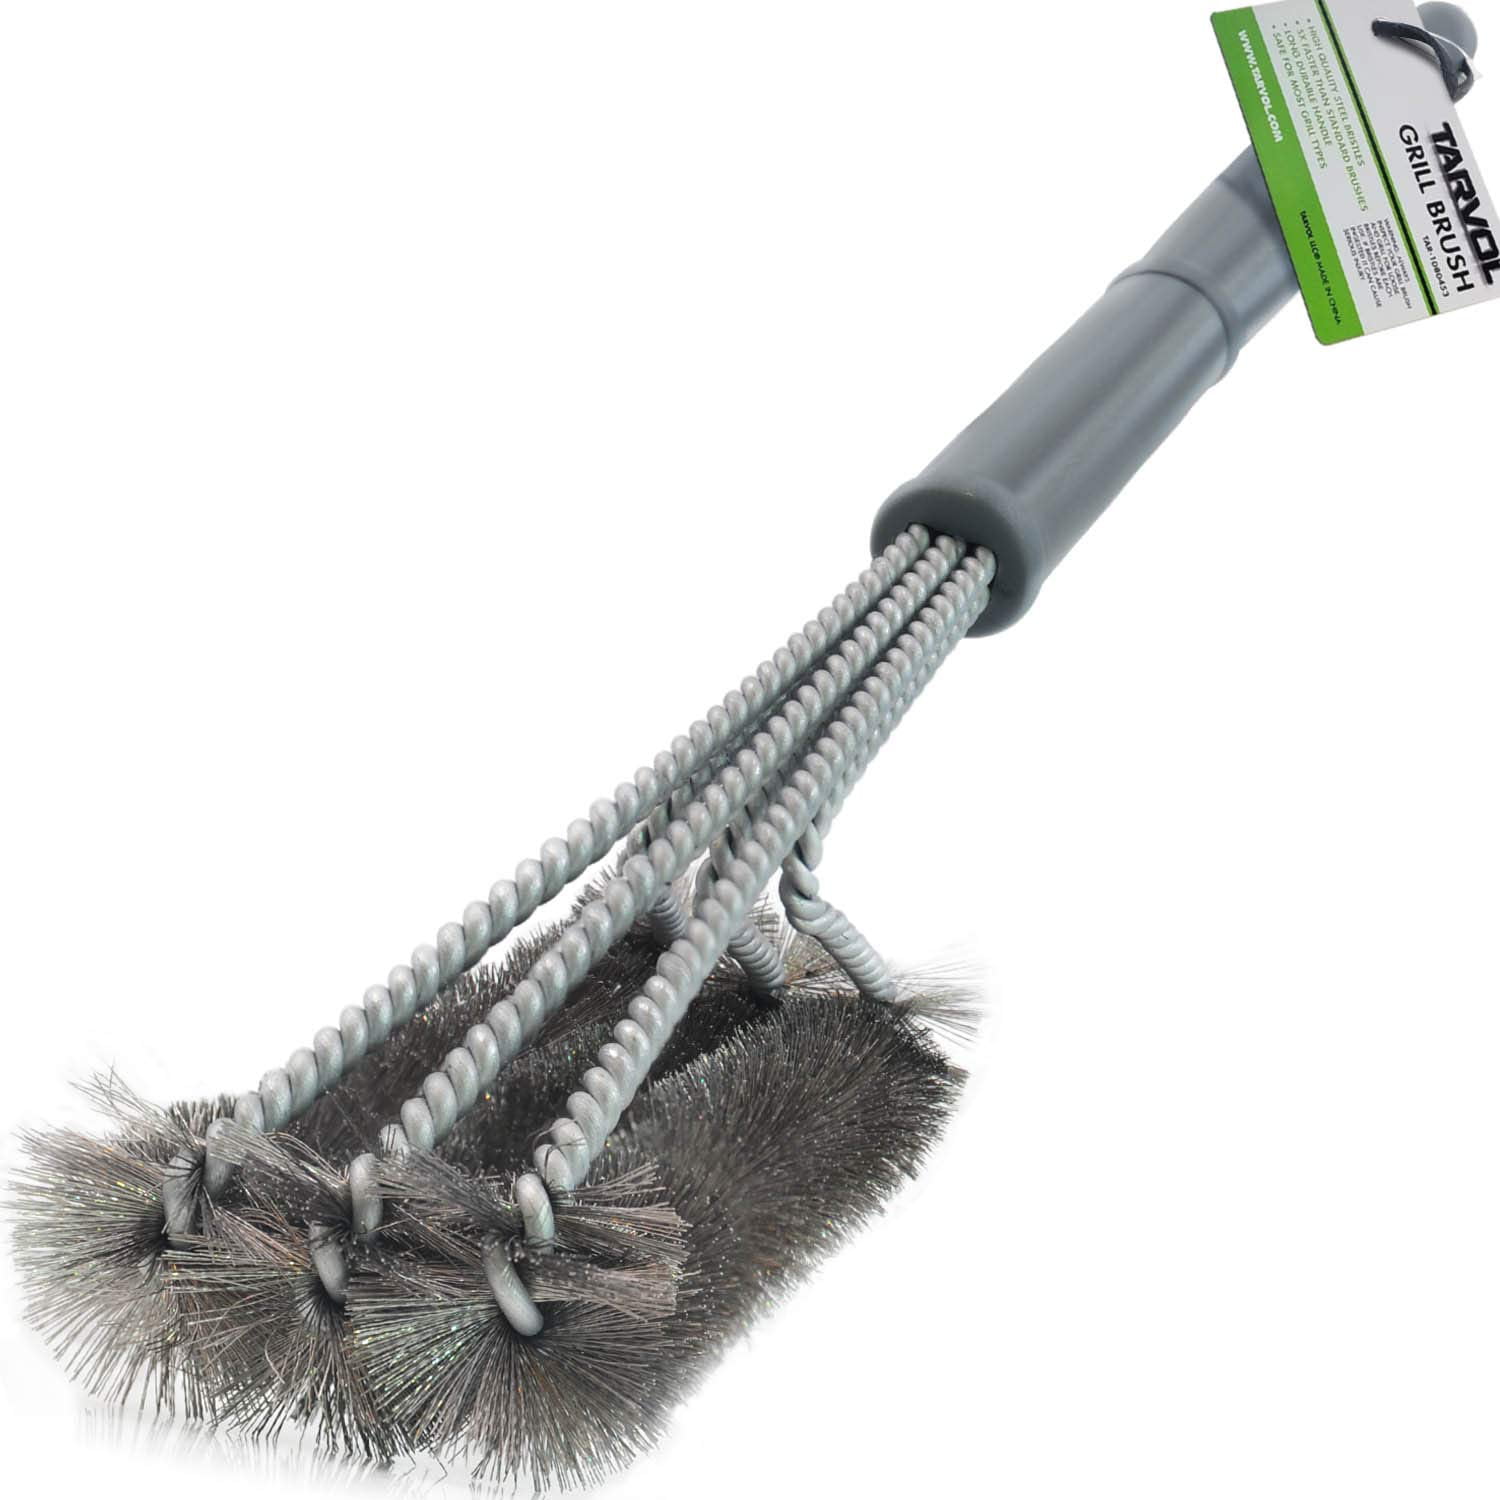 Brush For Stainless Steel Grill Grates